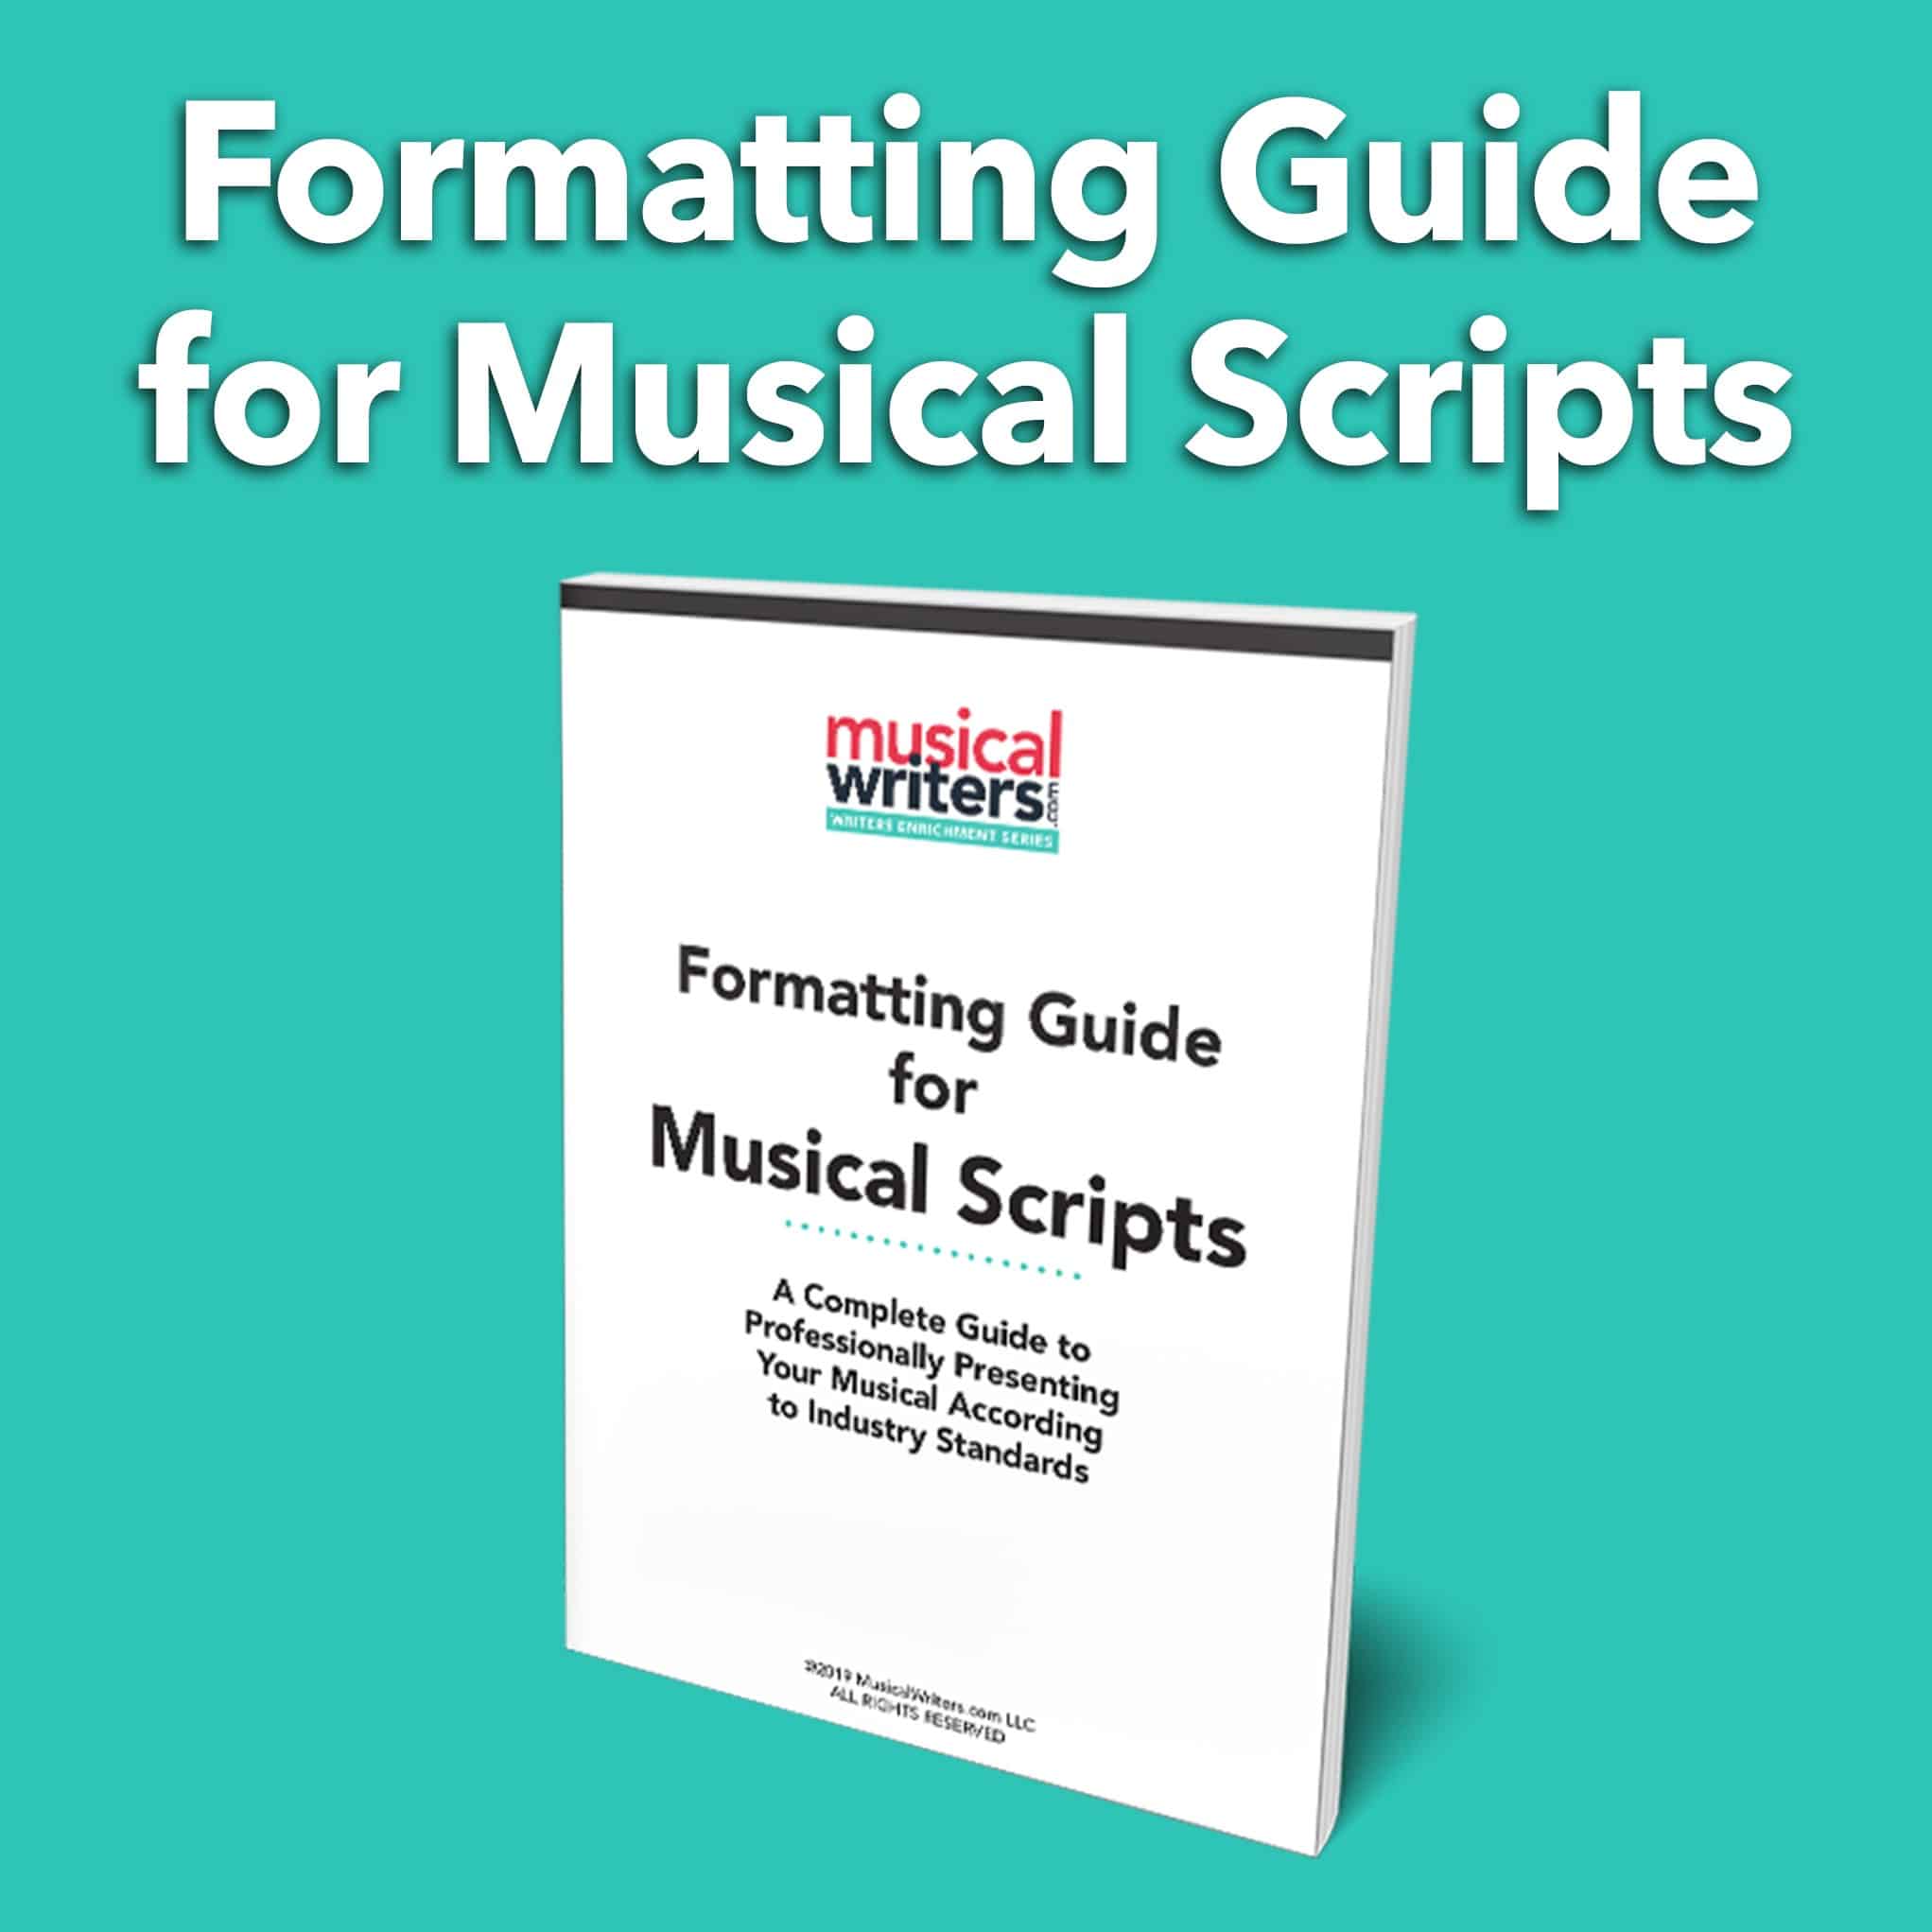 MW Formatting Guide for Musical Scripts